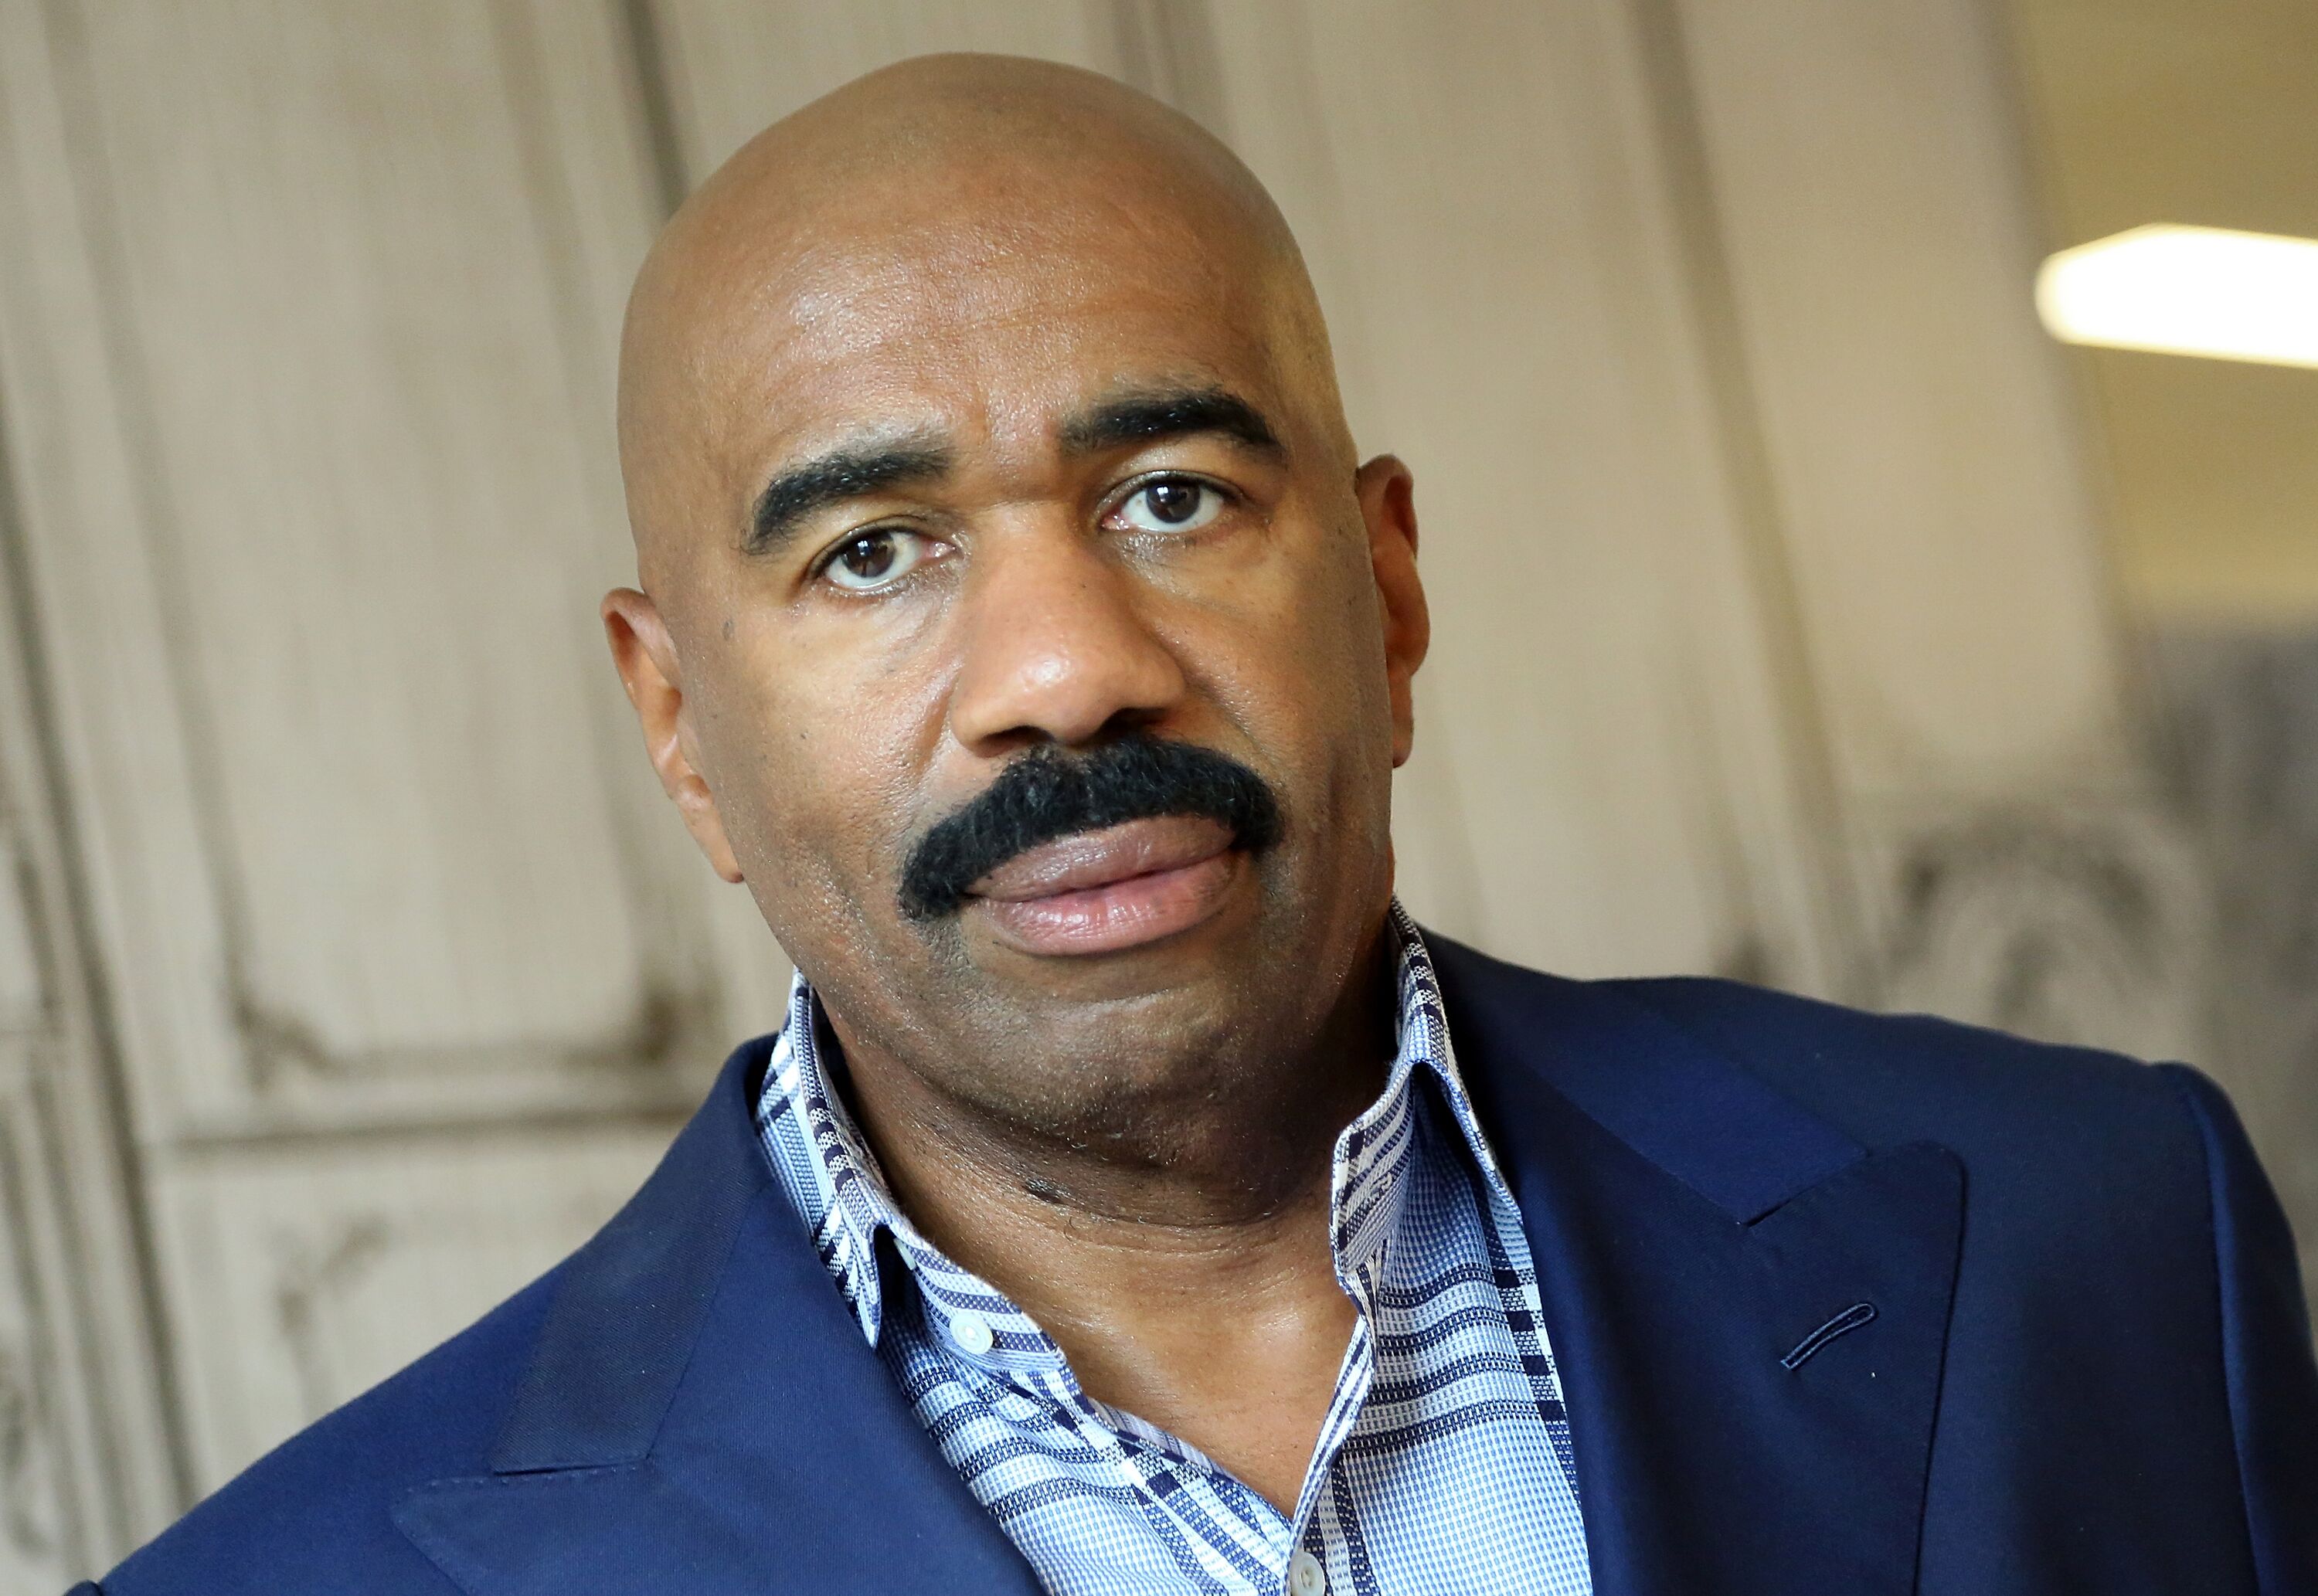 Comedian and TV Personality Steve Harvey attends AOL BUILD Speaker Series: Steve Harvey at AOL Studios In New York on September 4, 2015 in New York City | Photo: Getty Images